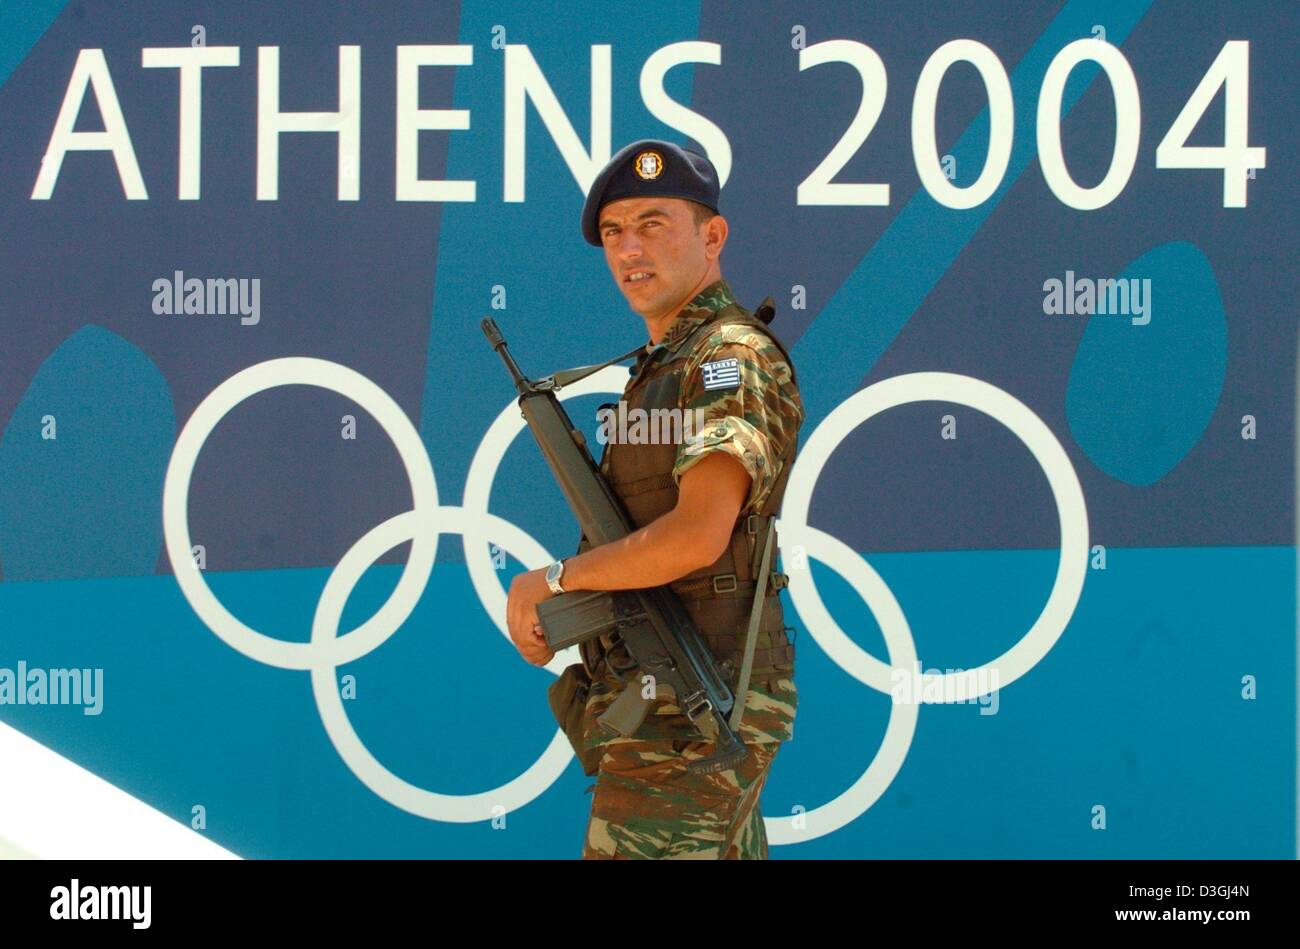 (dpa) - An armed soldier stands in front of the Olympic logo at the Olympic Rowing and Canoeing Centre in Schinias, Greece, 11 August 2004. With more than 10,800 athletes competing, the 2004 Summer Olympic Games will begin on Friday, 13 August 2004. Stock Photo